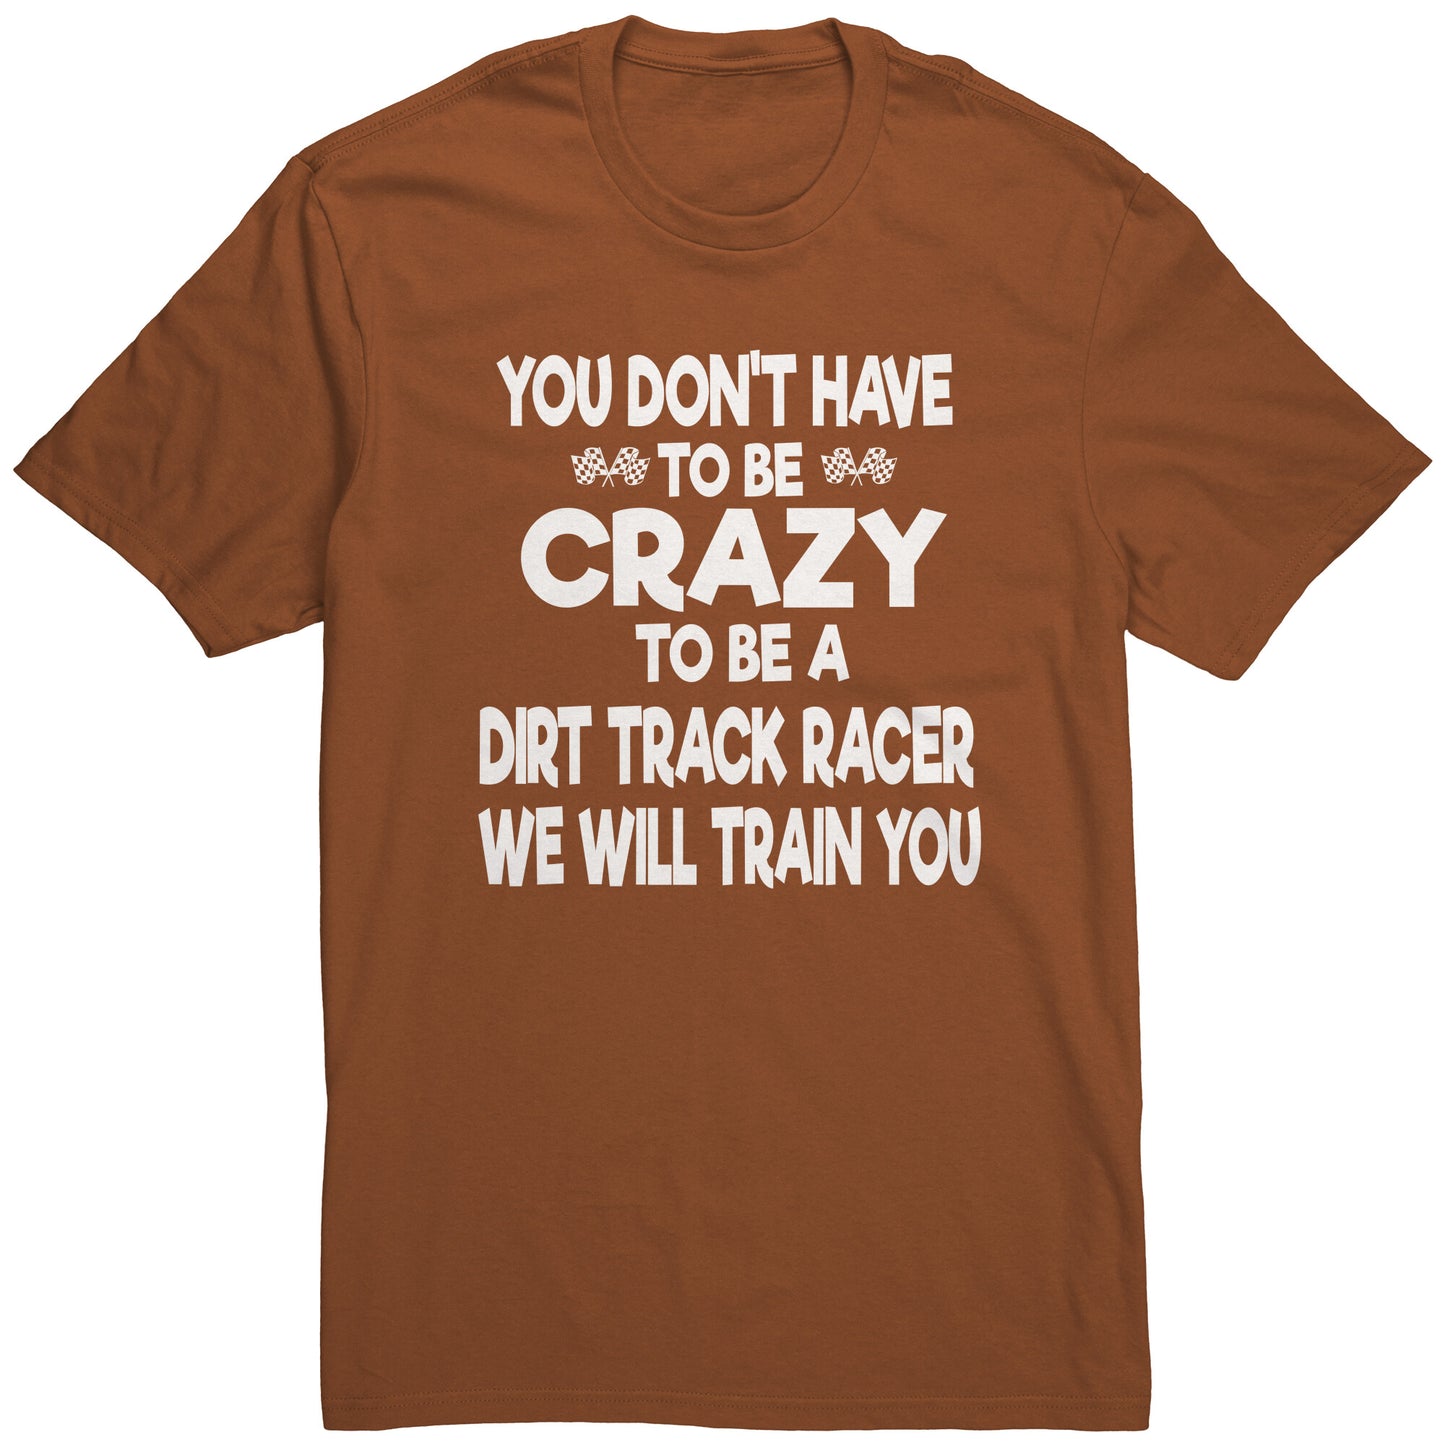 YOU DON'T HAVE TO BE CRAZY TO BE A DIRT TRACK RACER MEN'S T-SHIRT